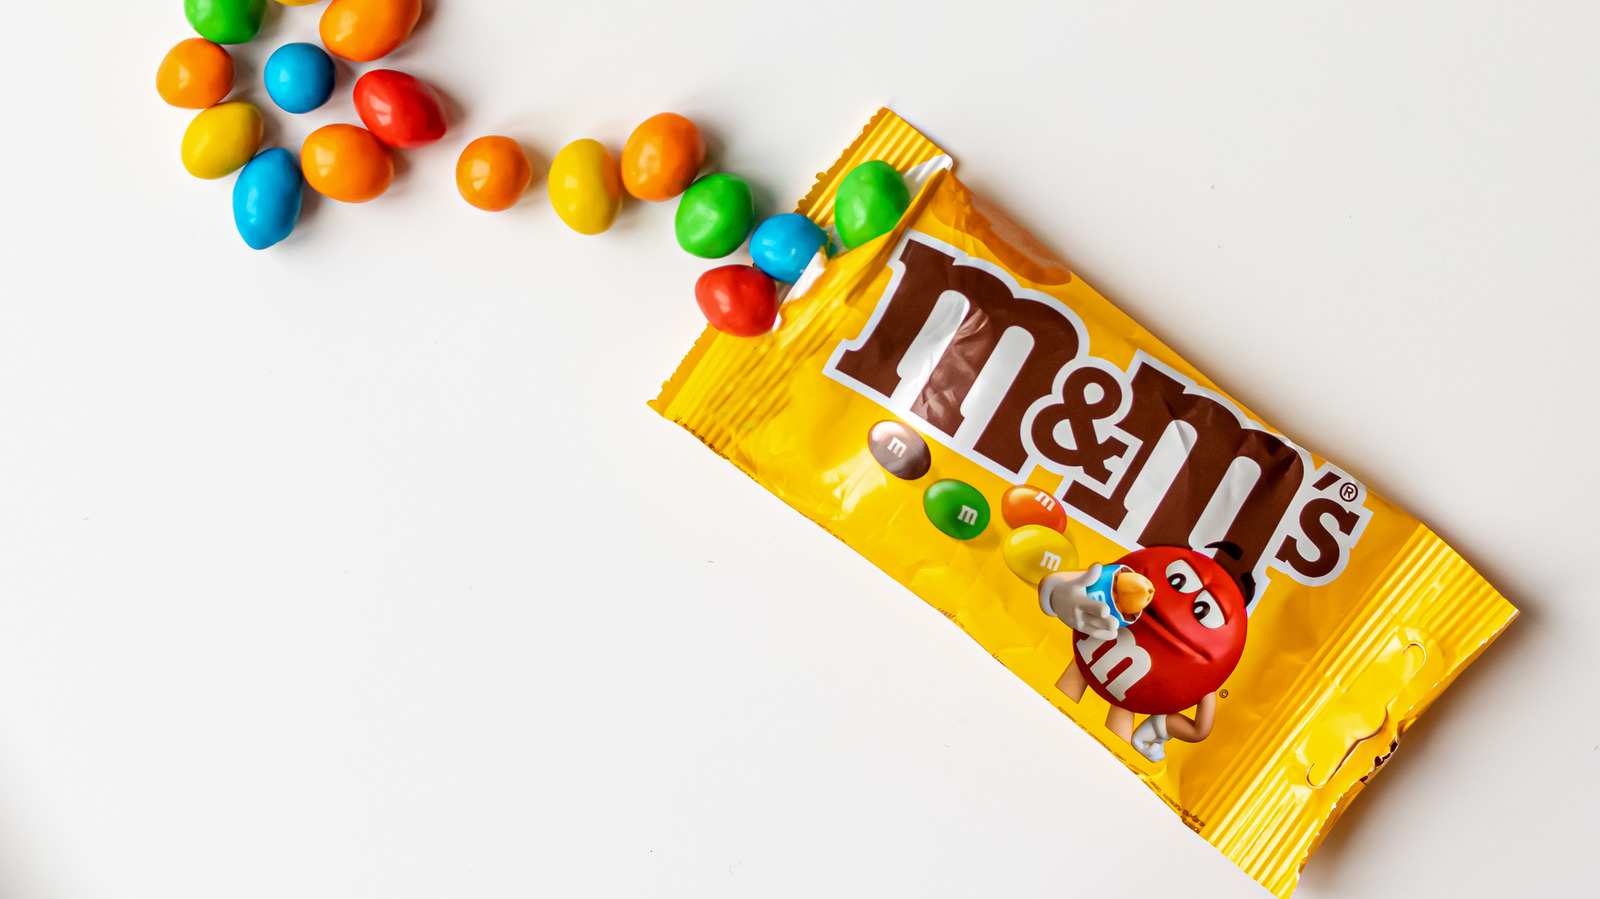 M&M's puts spokescandies on indefinite pause in wake of uproar over  changes to green M&M